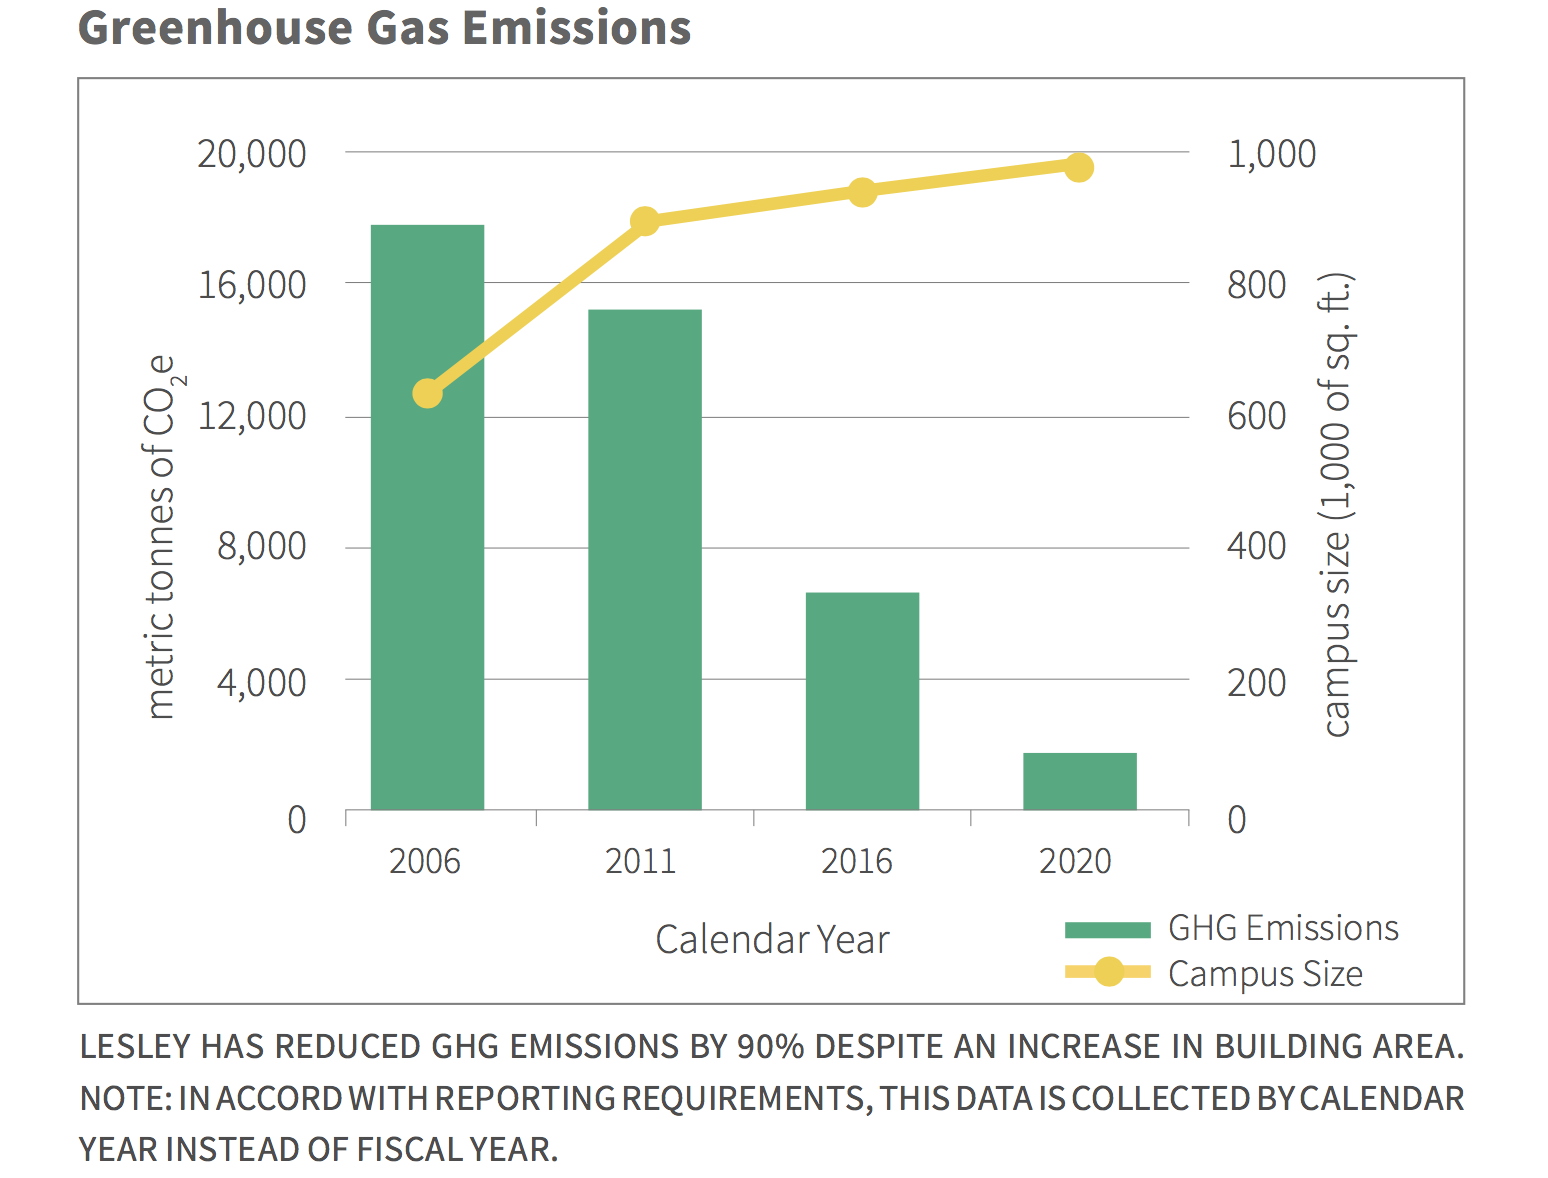 chart showing Lesley's greenhouse gas emissions reductions